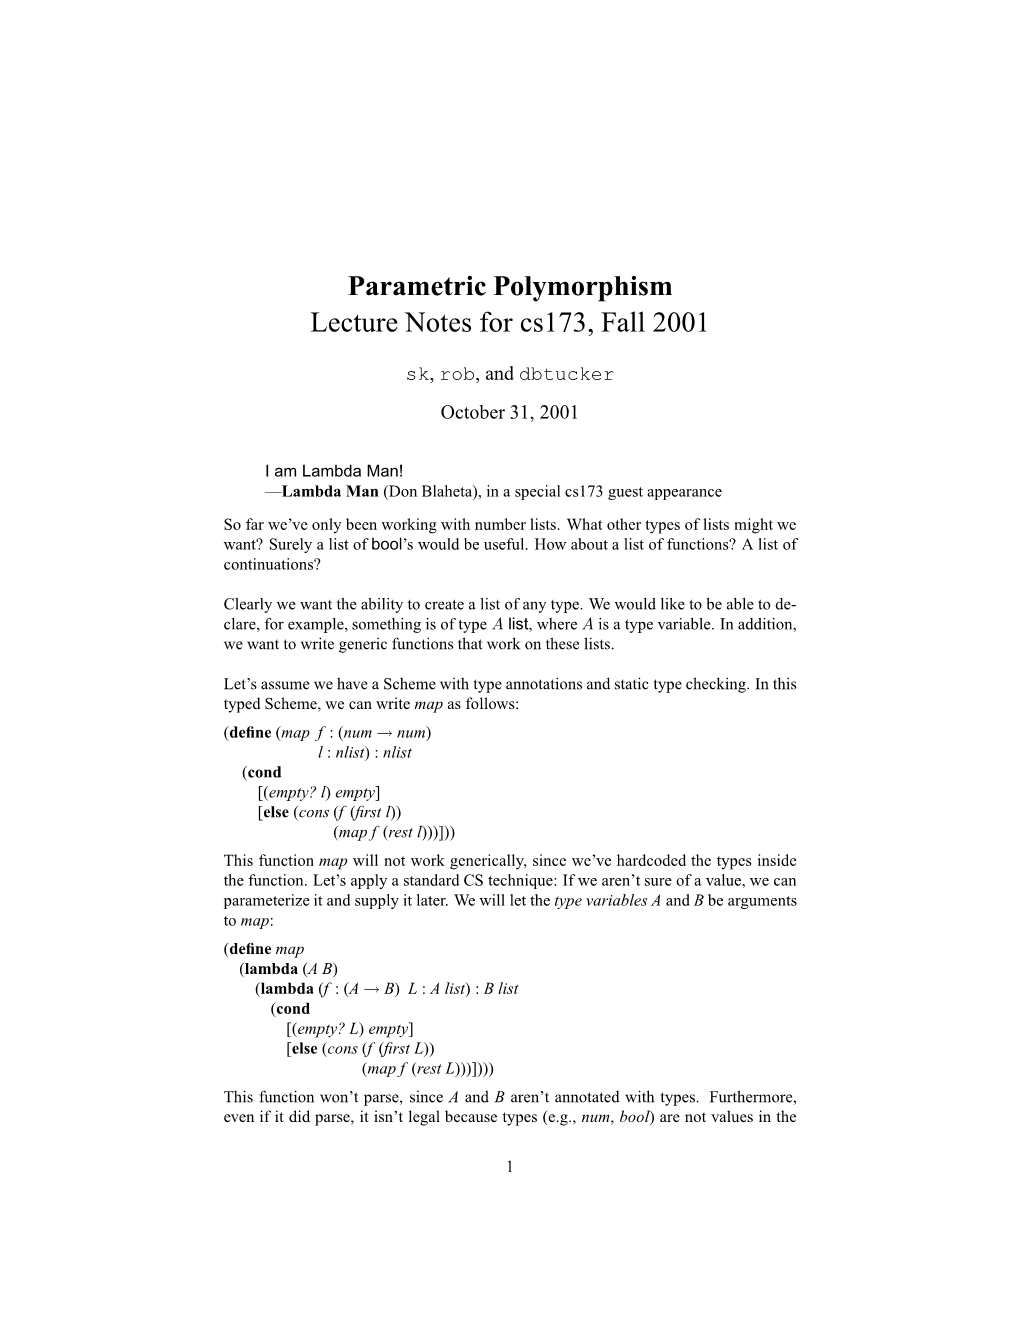 Parametric Polymorphism Lecture Notes for Cs173, Fall 2001